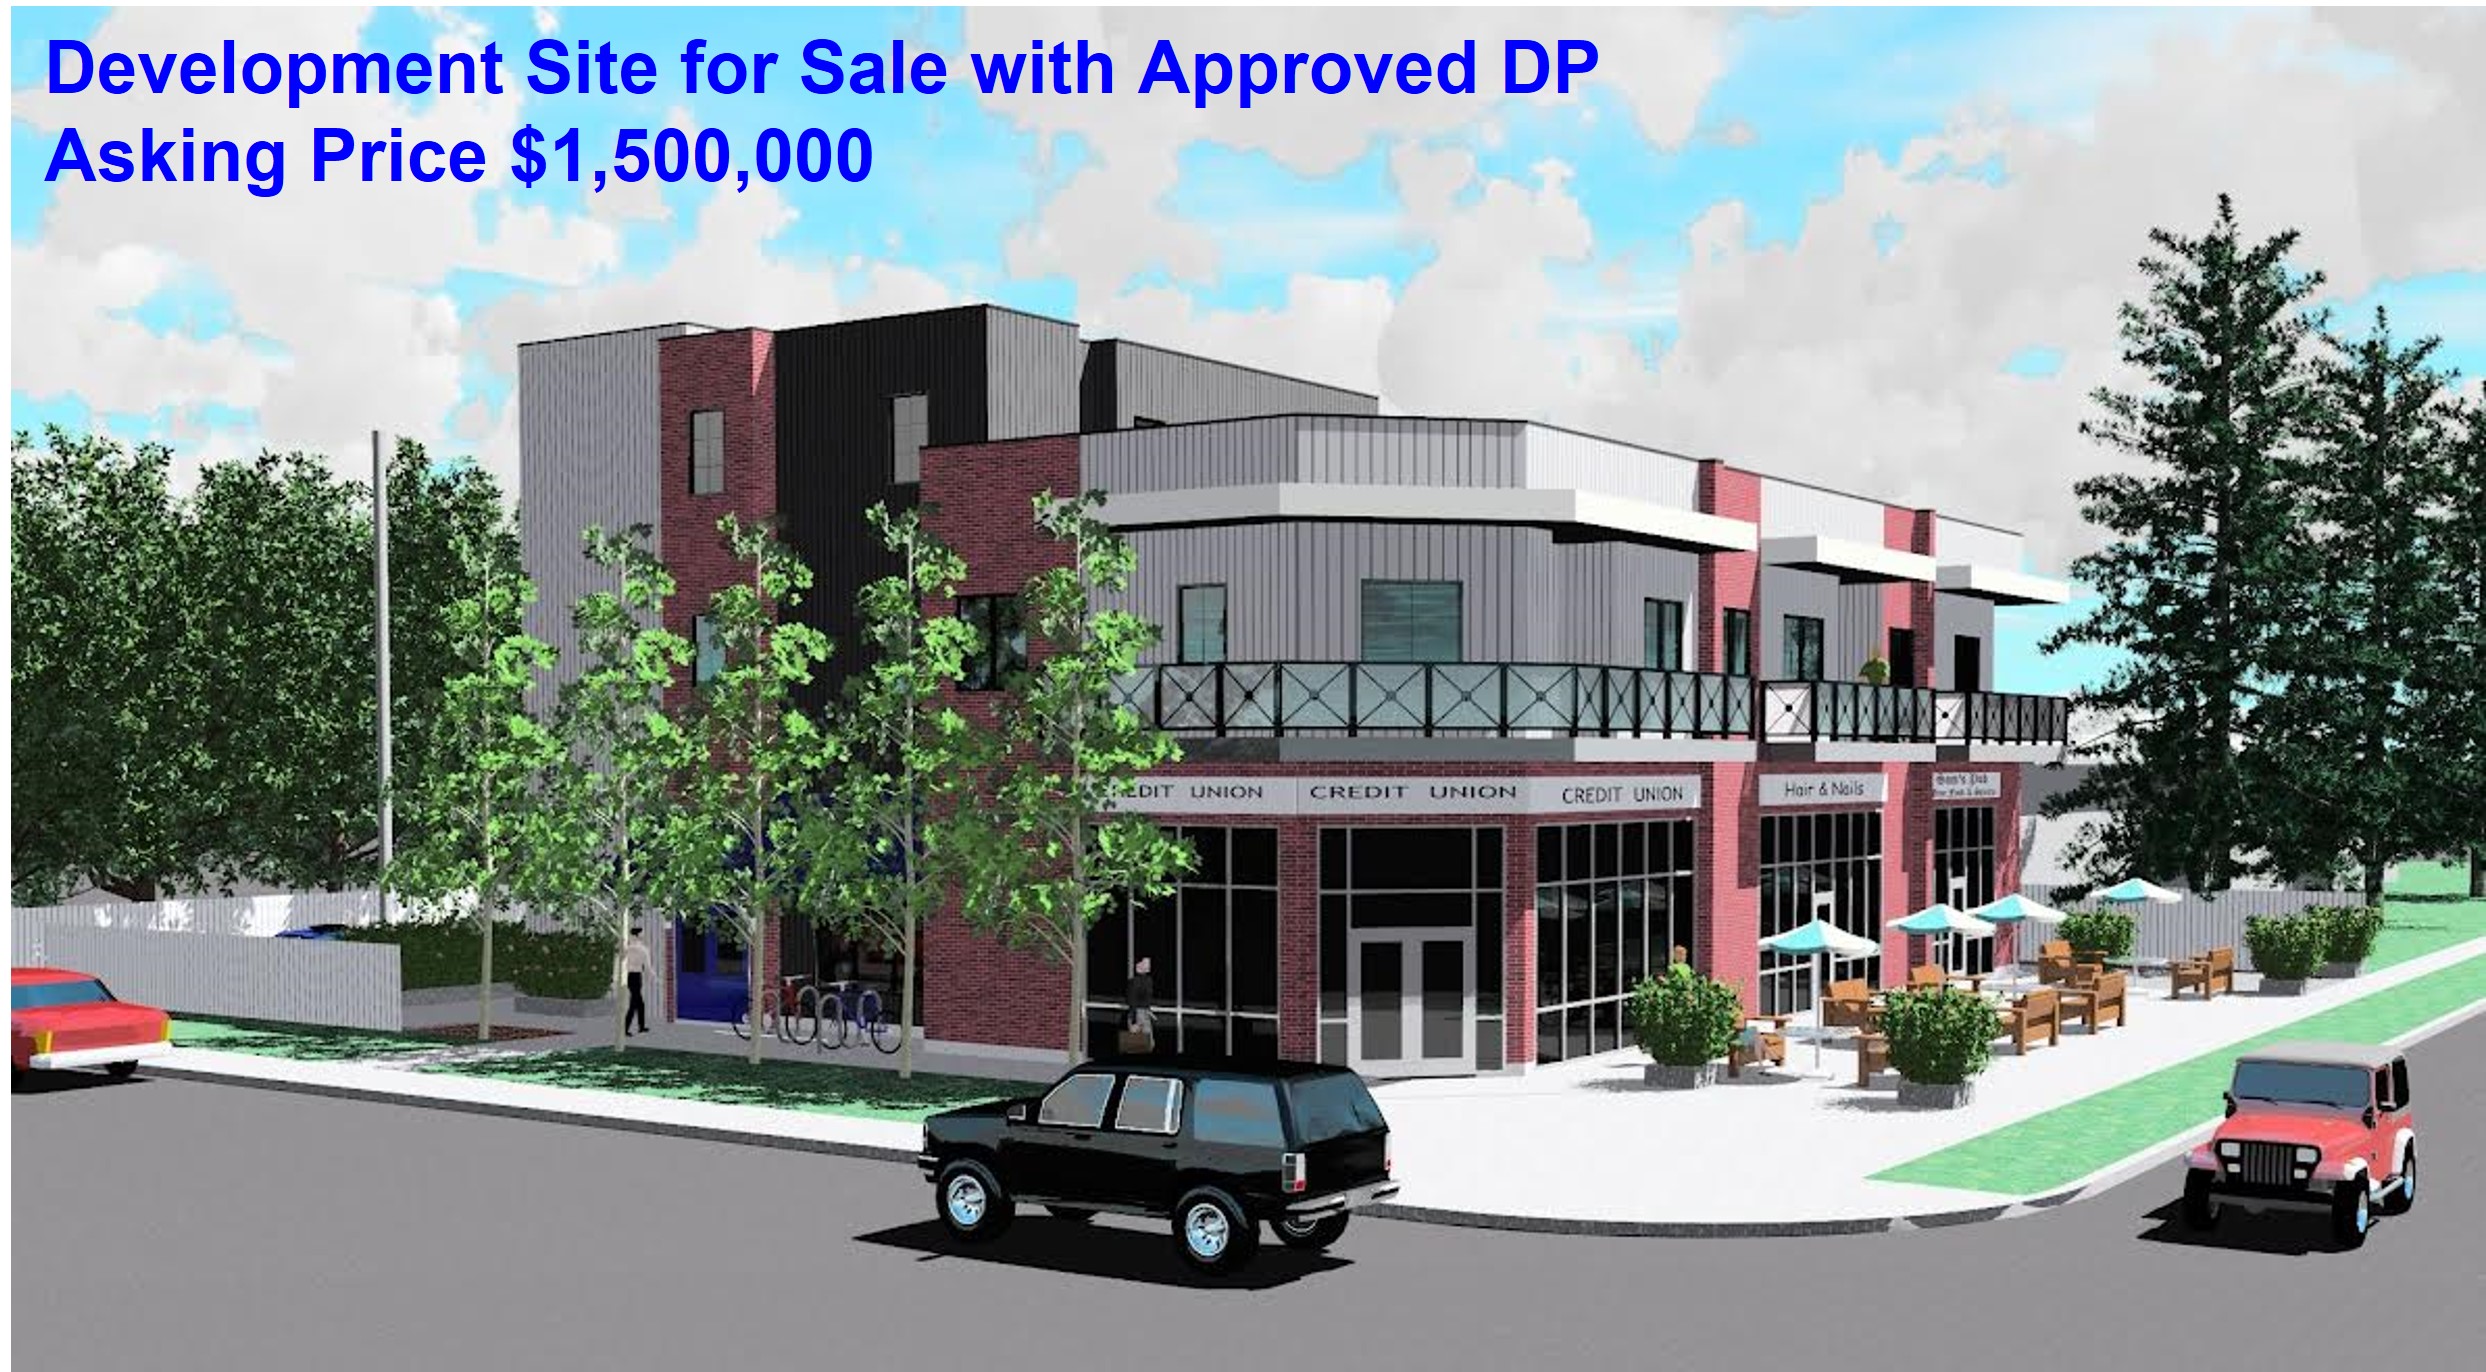 Development Property For Sale with Permits